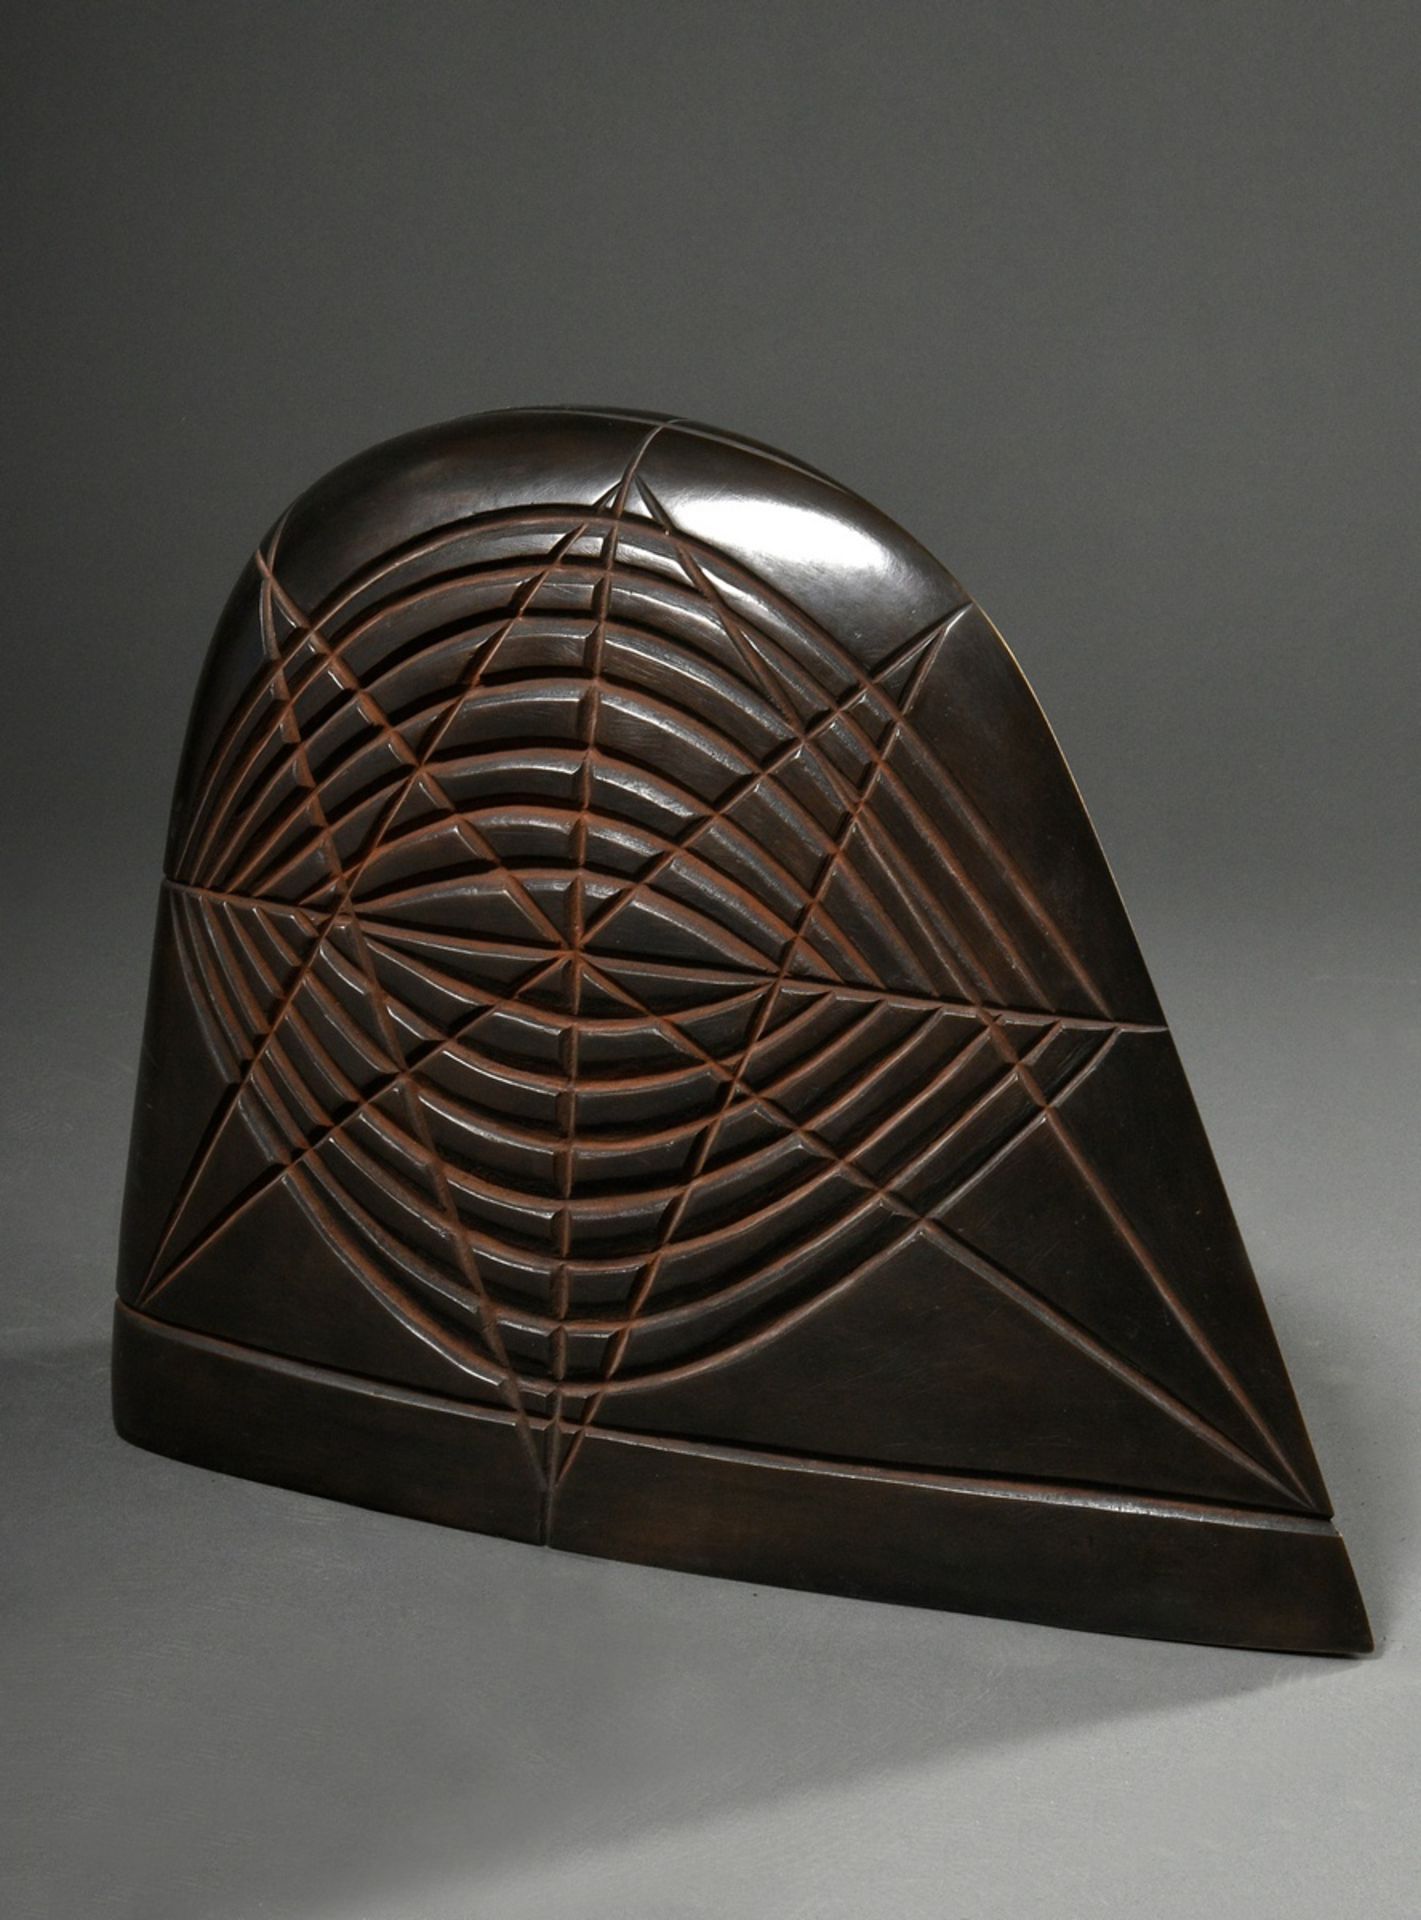 Kriester, Rainer (1935-2002) "Great Sun Sign" 1995, bronze hollow casting, inside signed/marked "2.